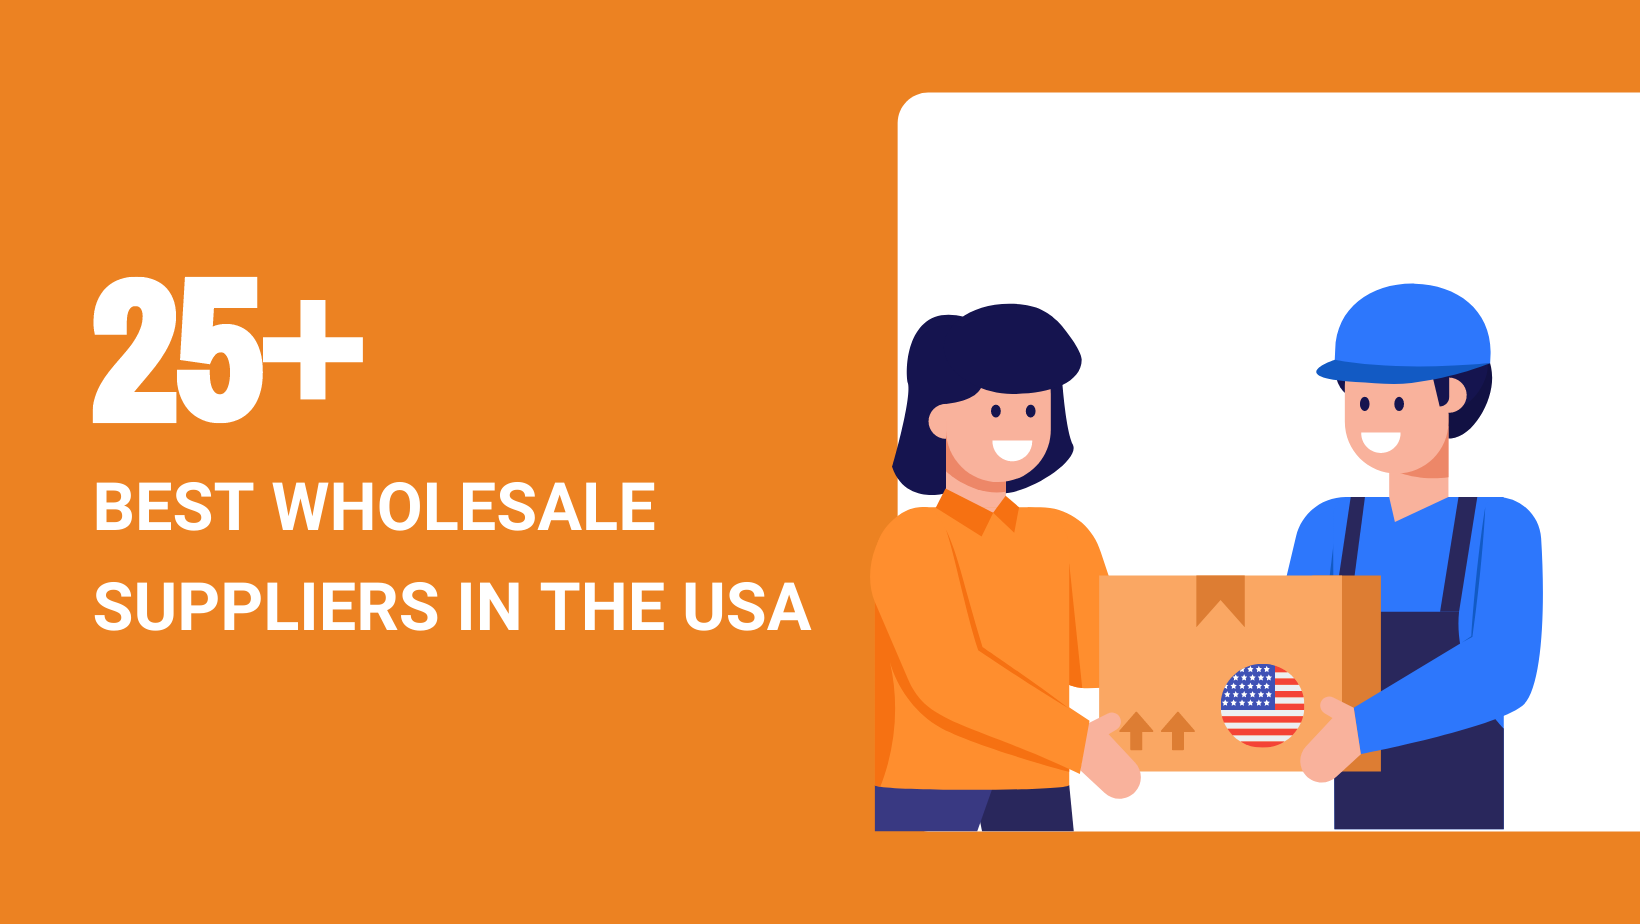 What are some reliable wholesale retailers in the United States